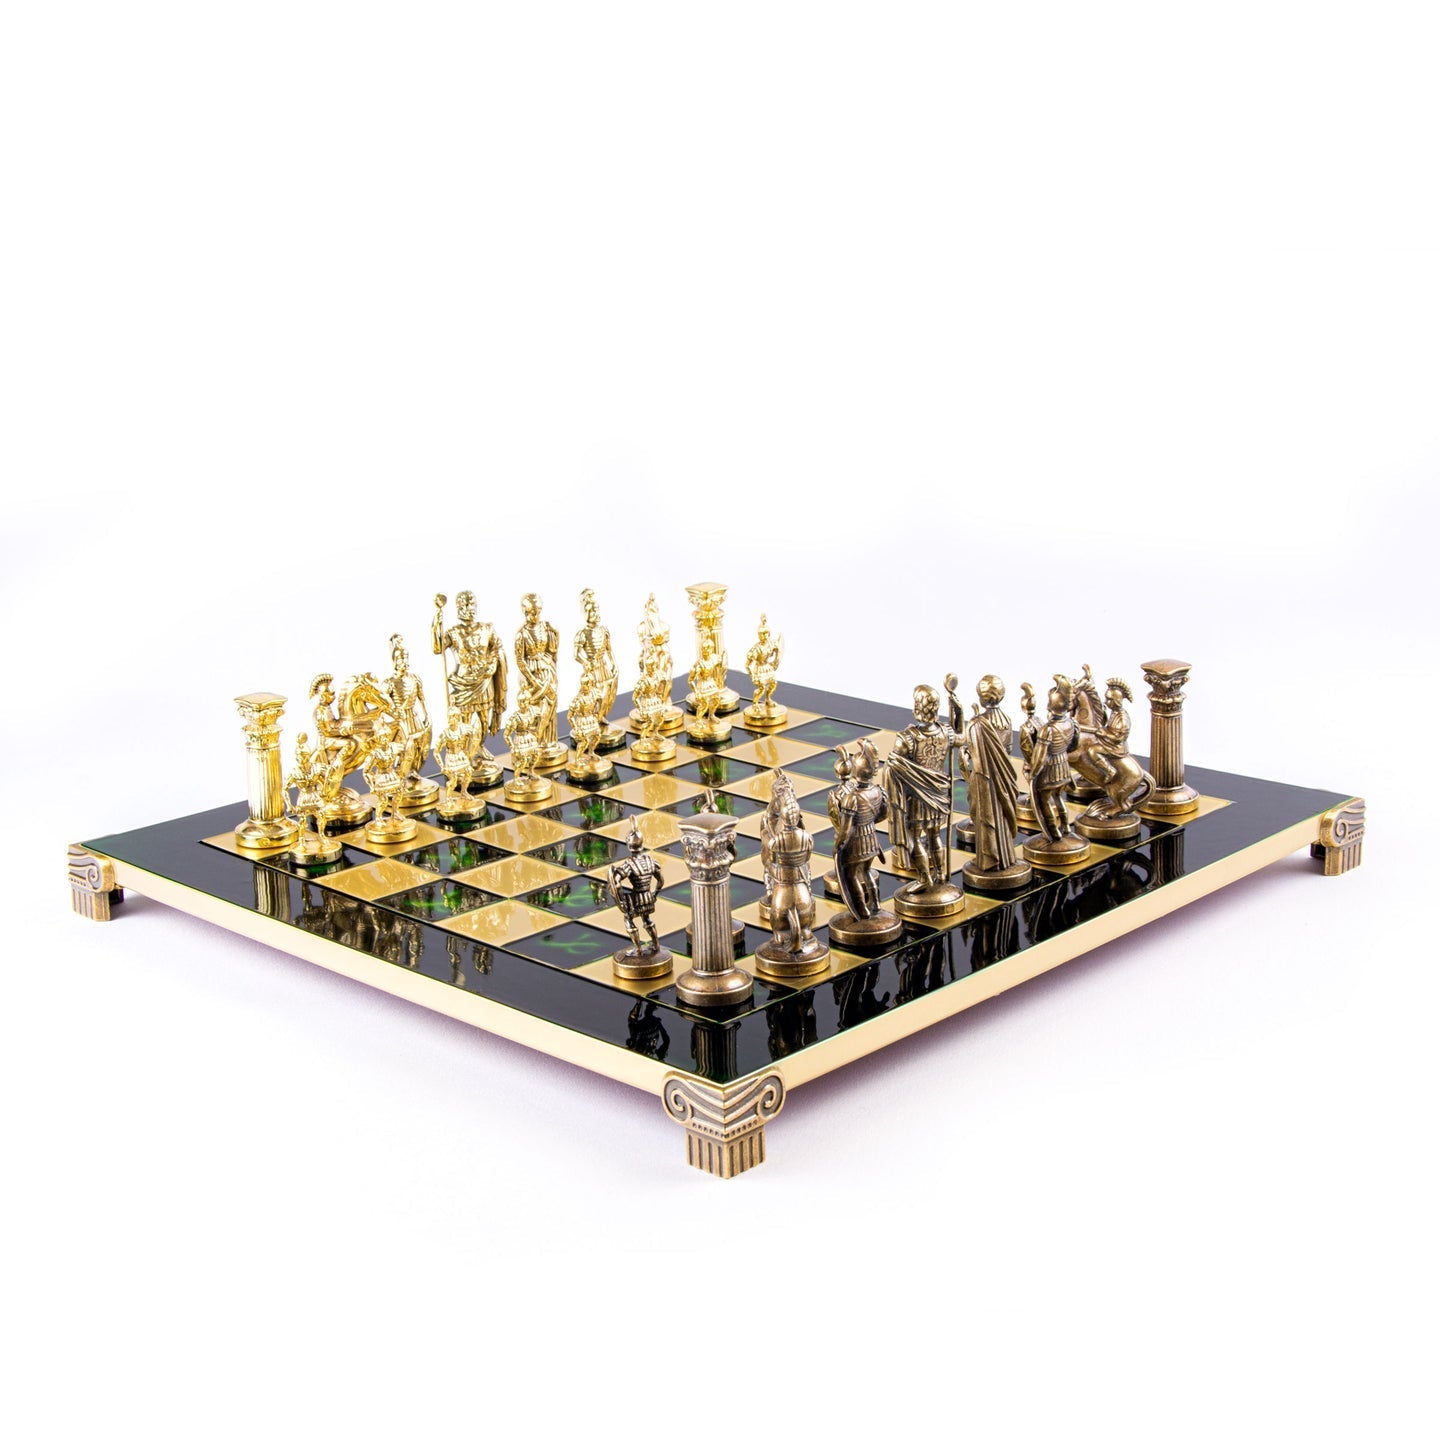 GREEK ROMAN PERIOD CHESS SET with gold/brown chessmen and bronze chessboard - 44 x 44cm (Large) - LAZADO